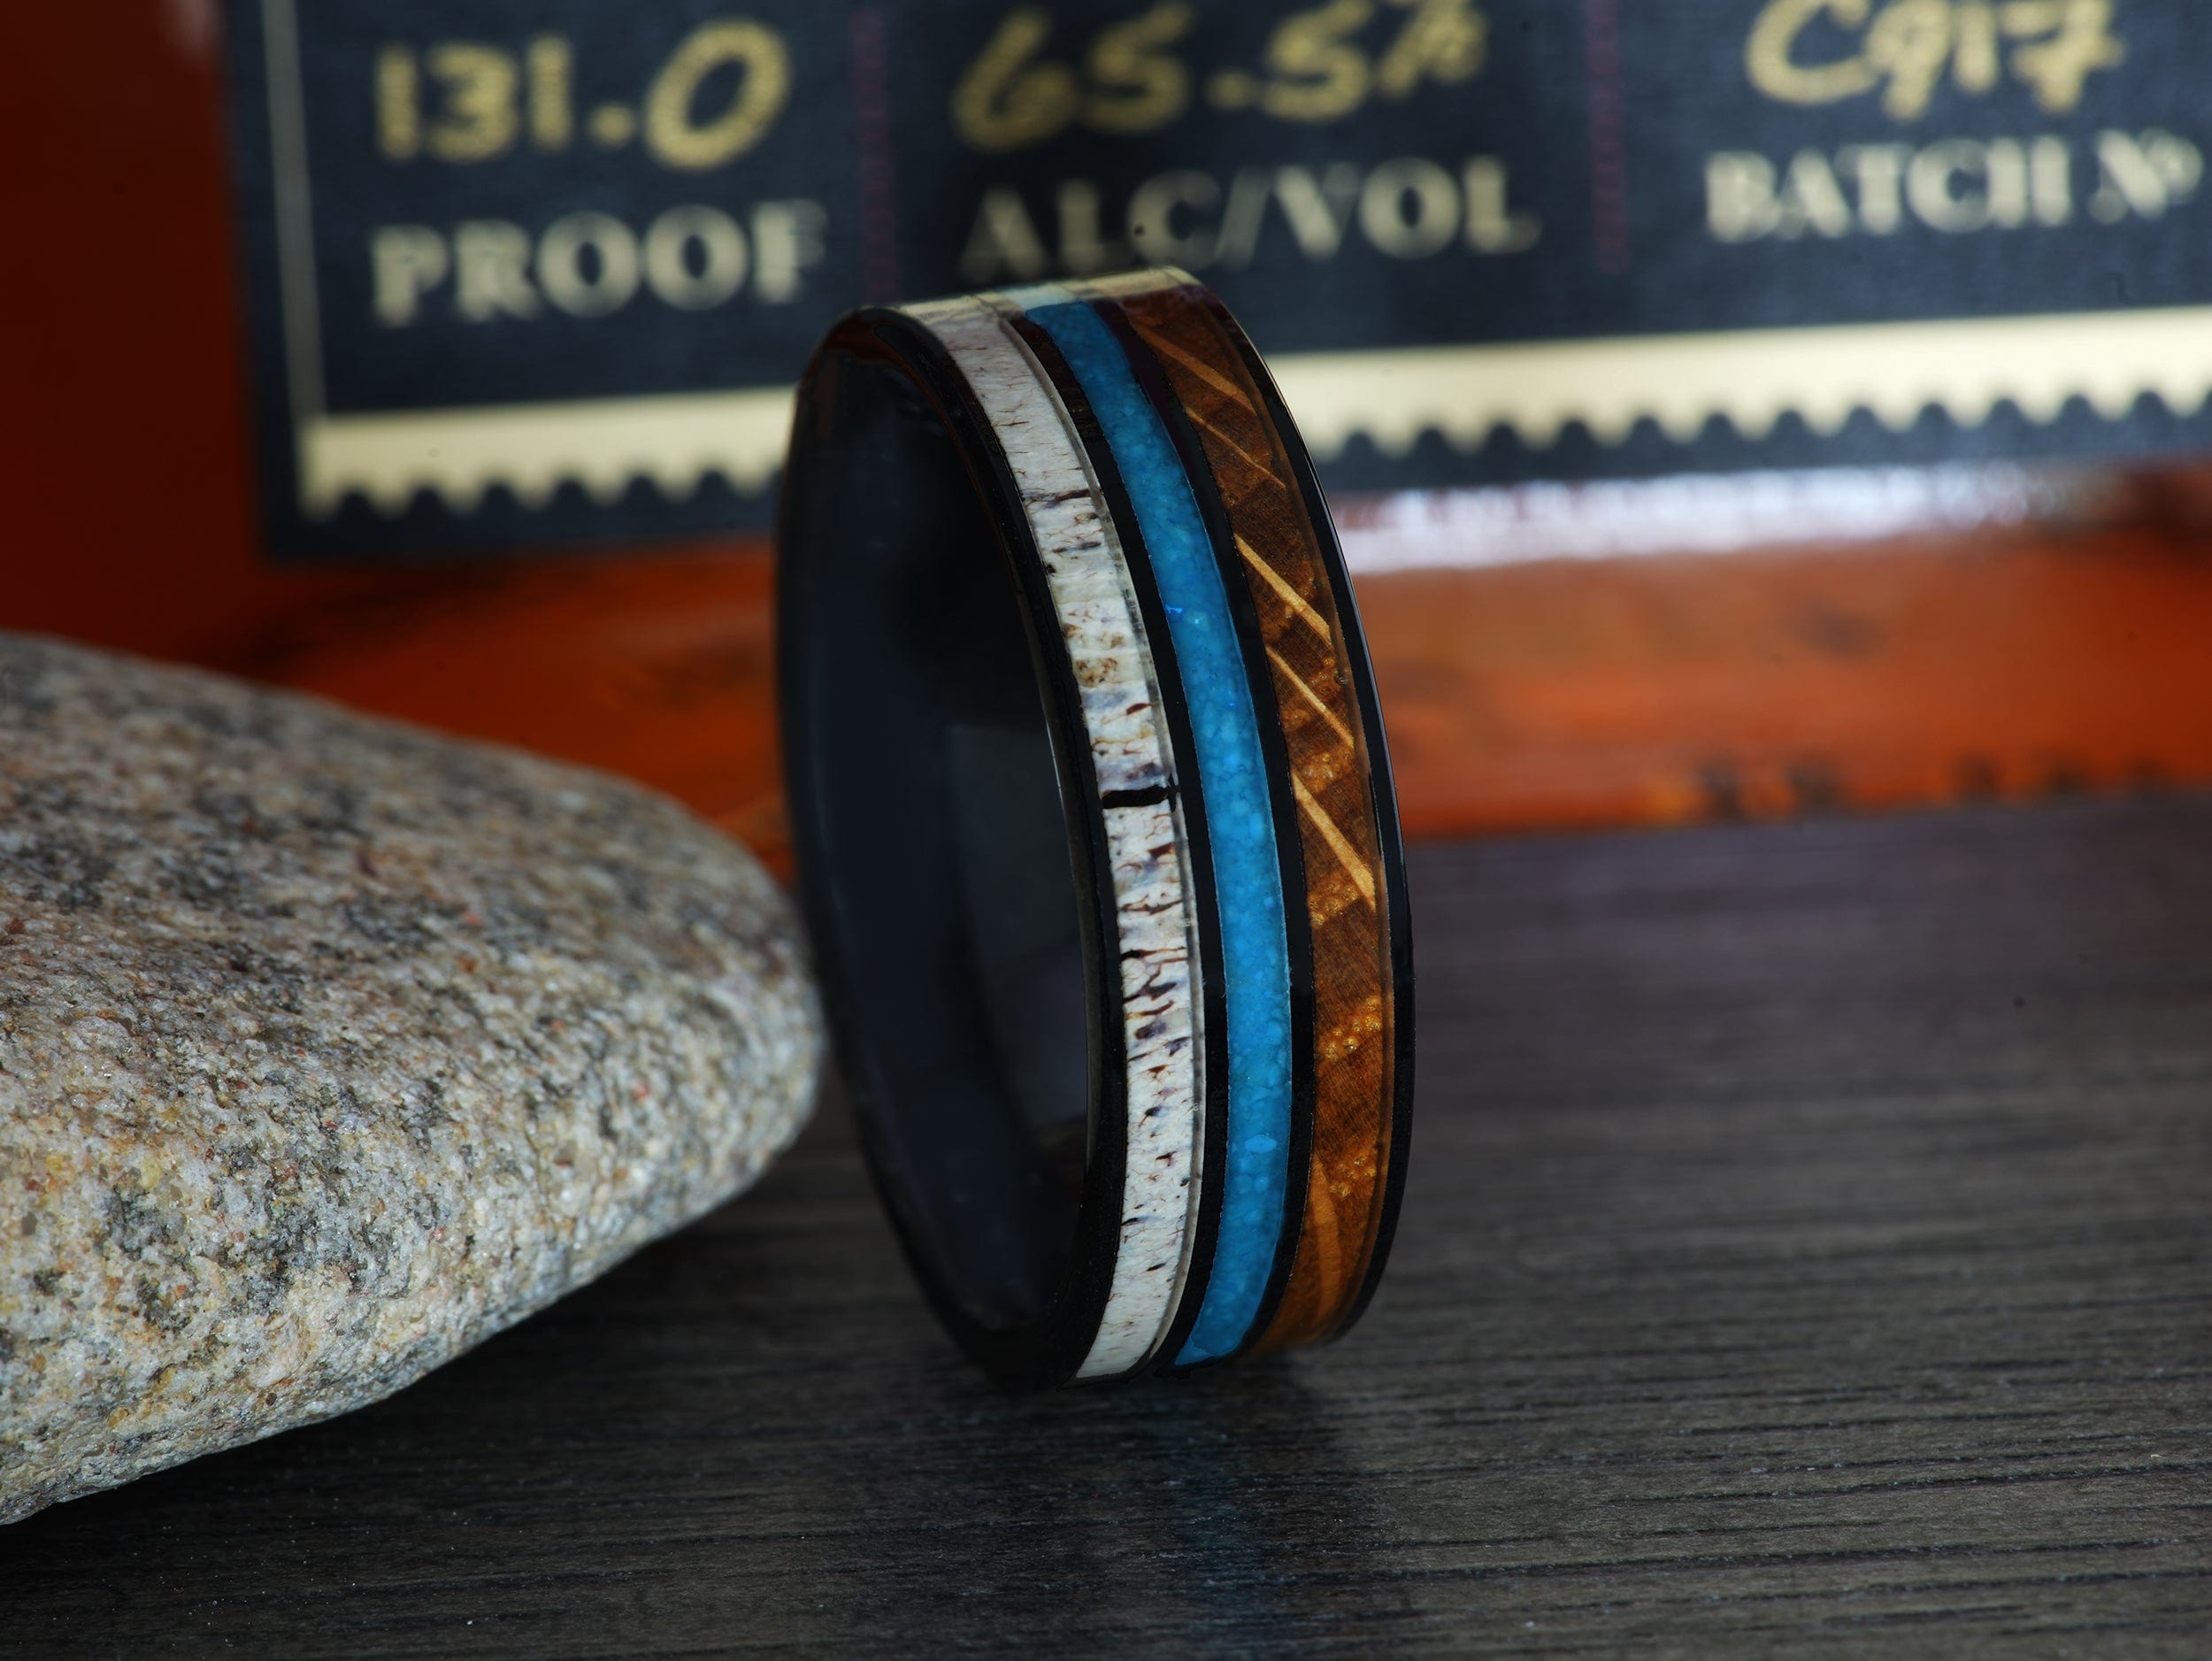 The Prospector | Mens Wedding Band Made of Ceramic, Bourbon Barrel Wood and Crushed Turquoise